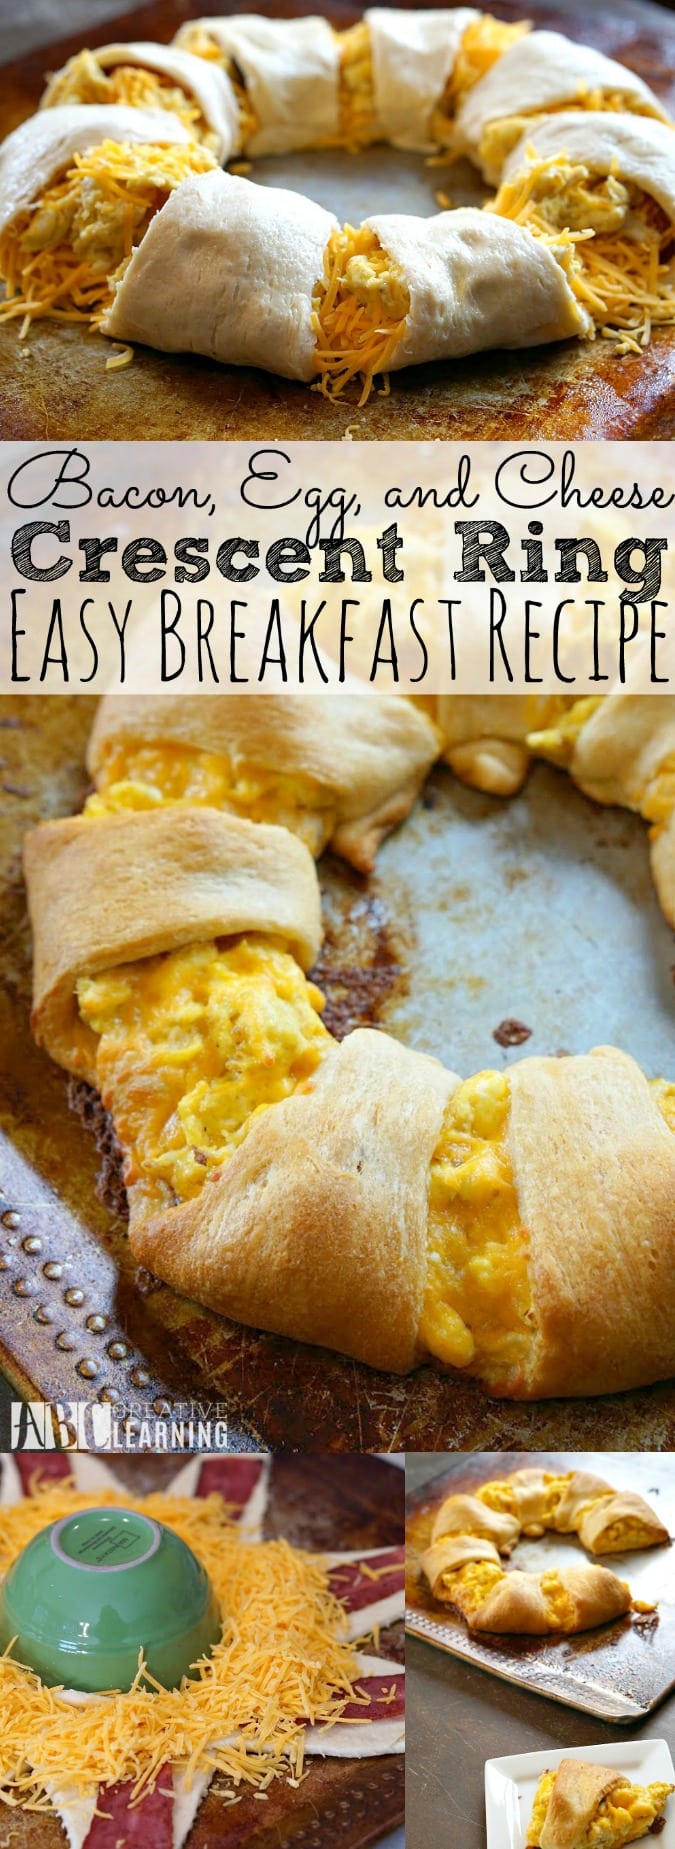 Bacon Egg and Cheese Crescent Ring Recipe Easy Breakfast Recipes abccreativelearning.com